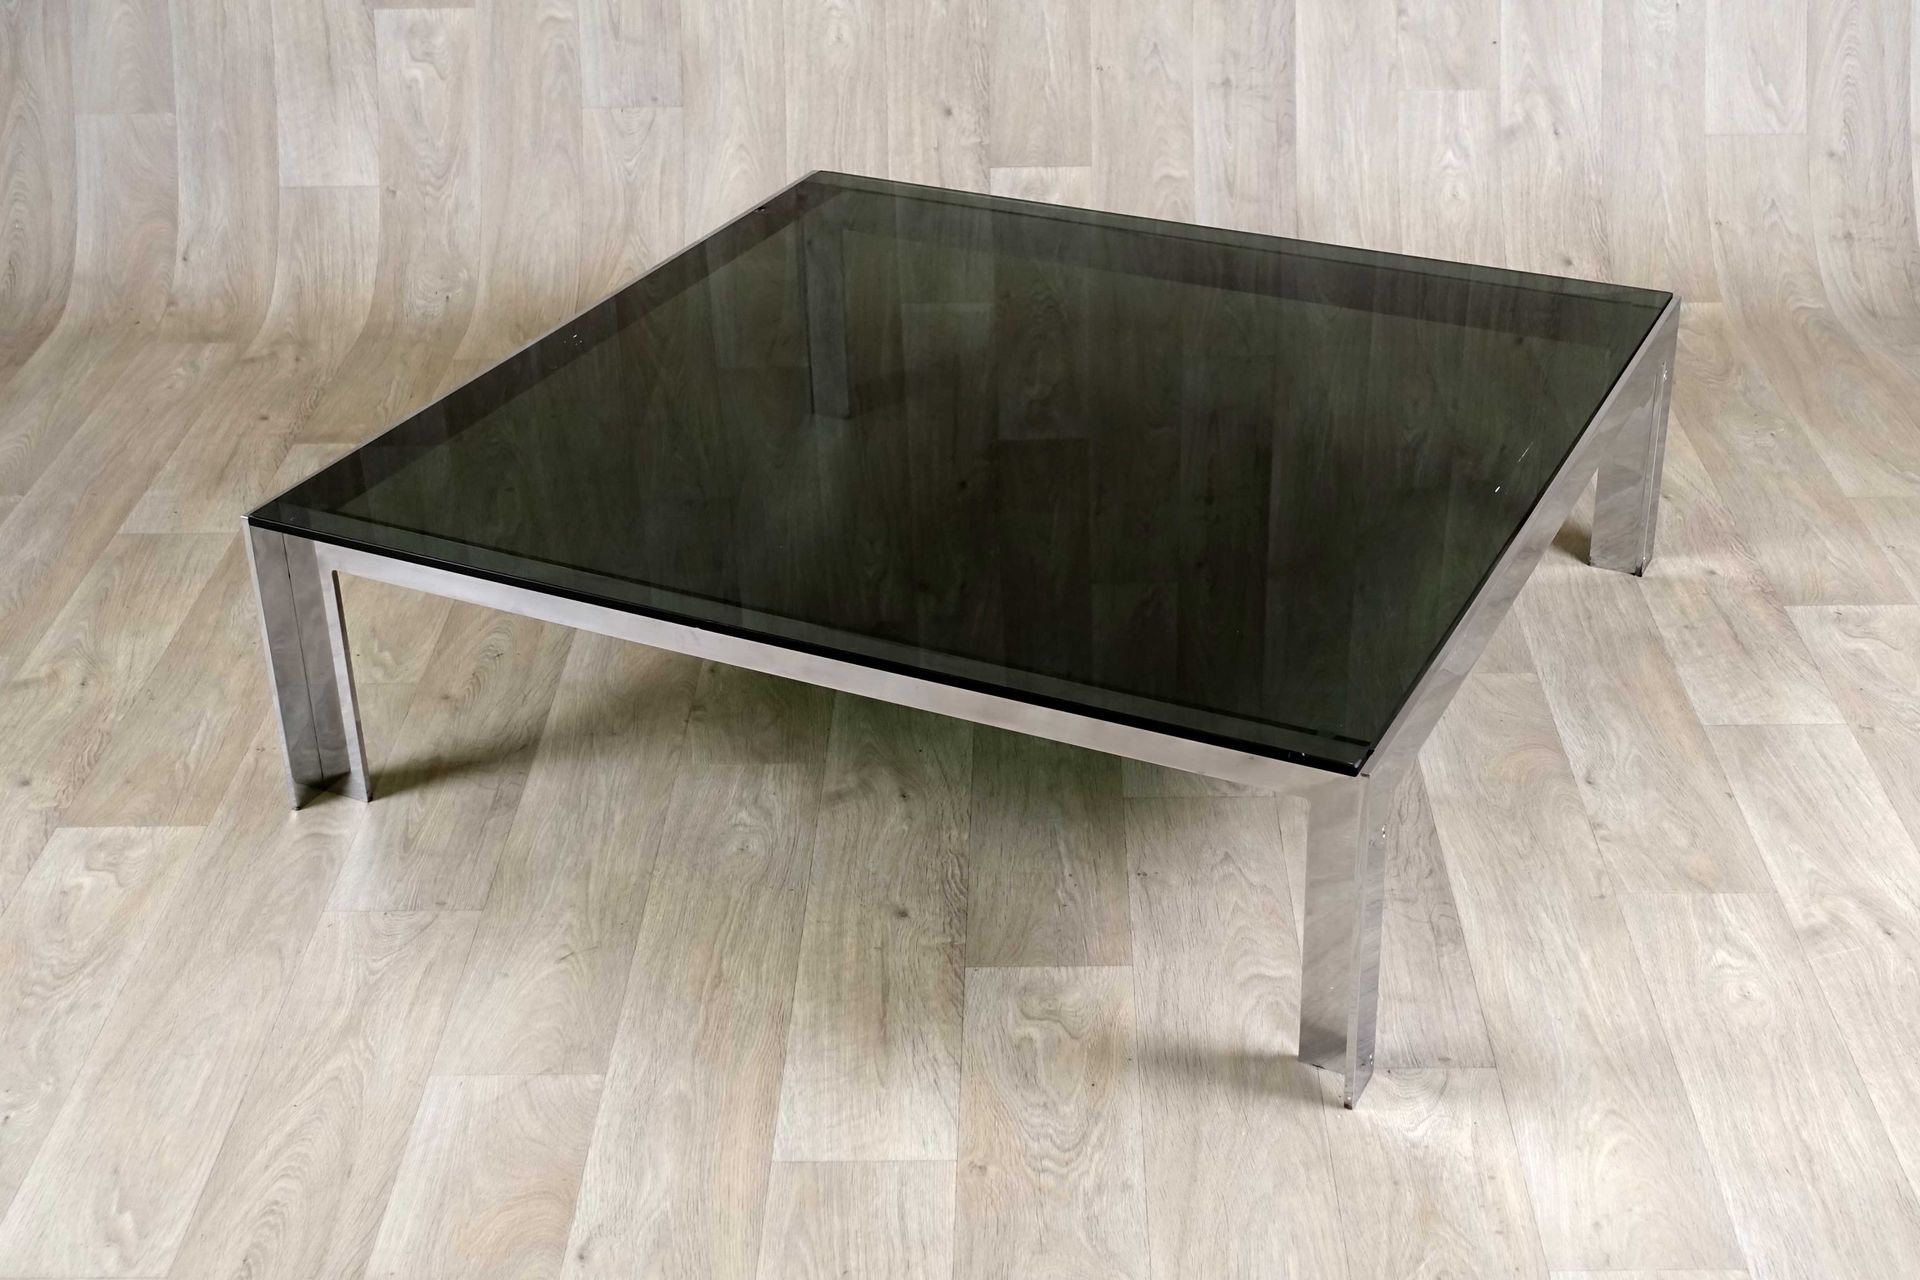 Table de Salon. 
Smoked glass shelf and chromed metal base. Dimensions: 36 x 122&hellip;